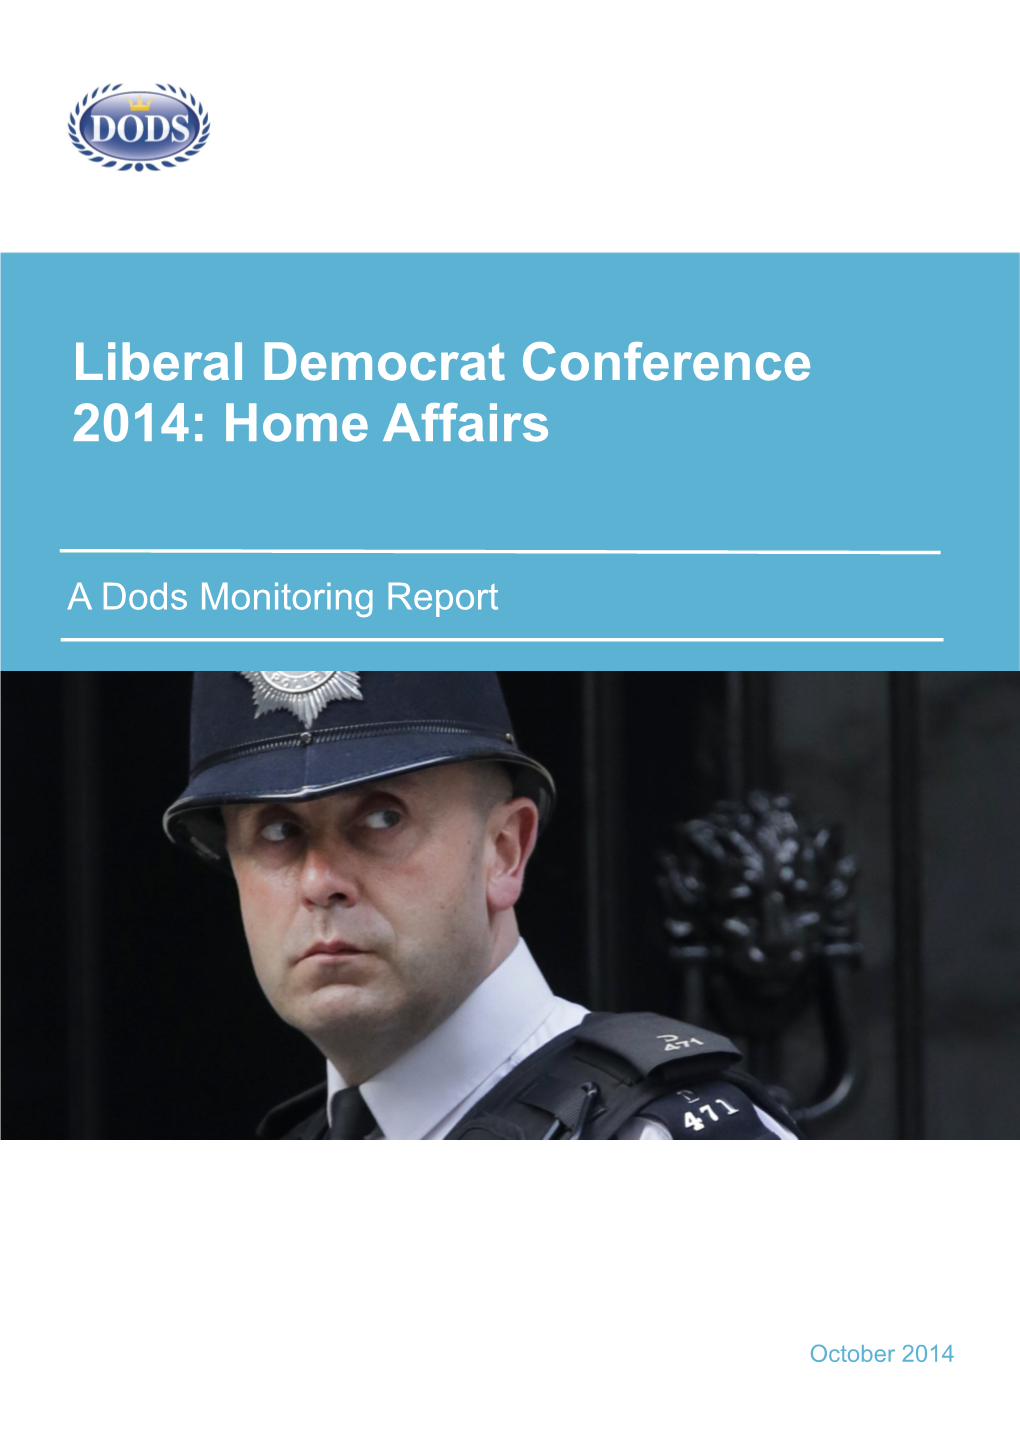 Liberal Democrat Conference 2014: Home Affairs